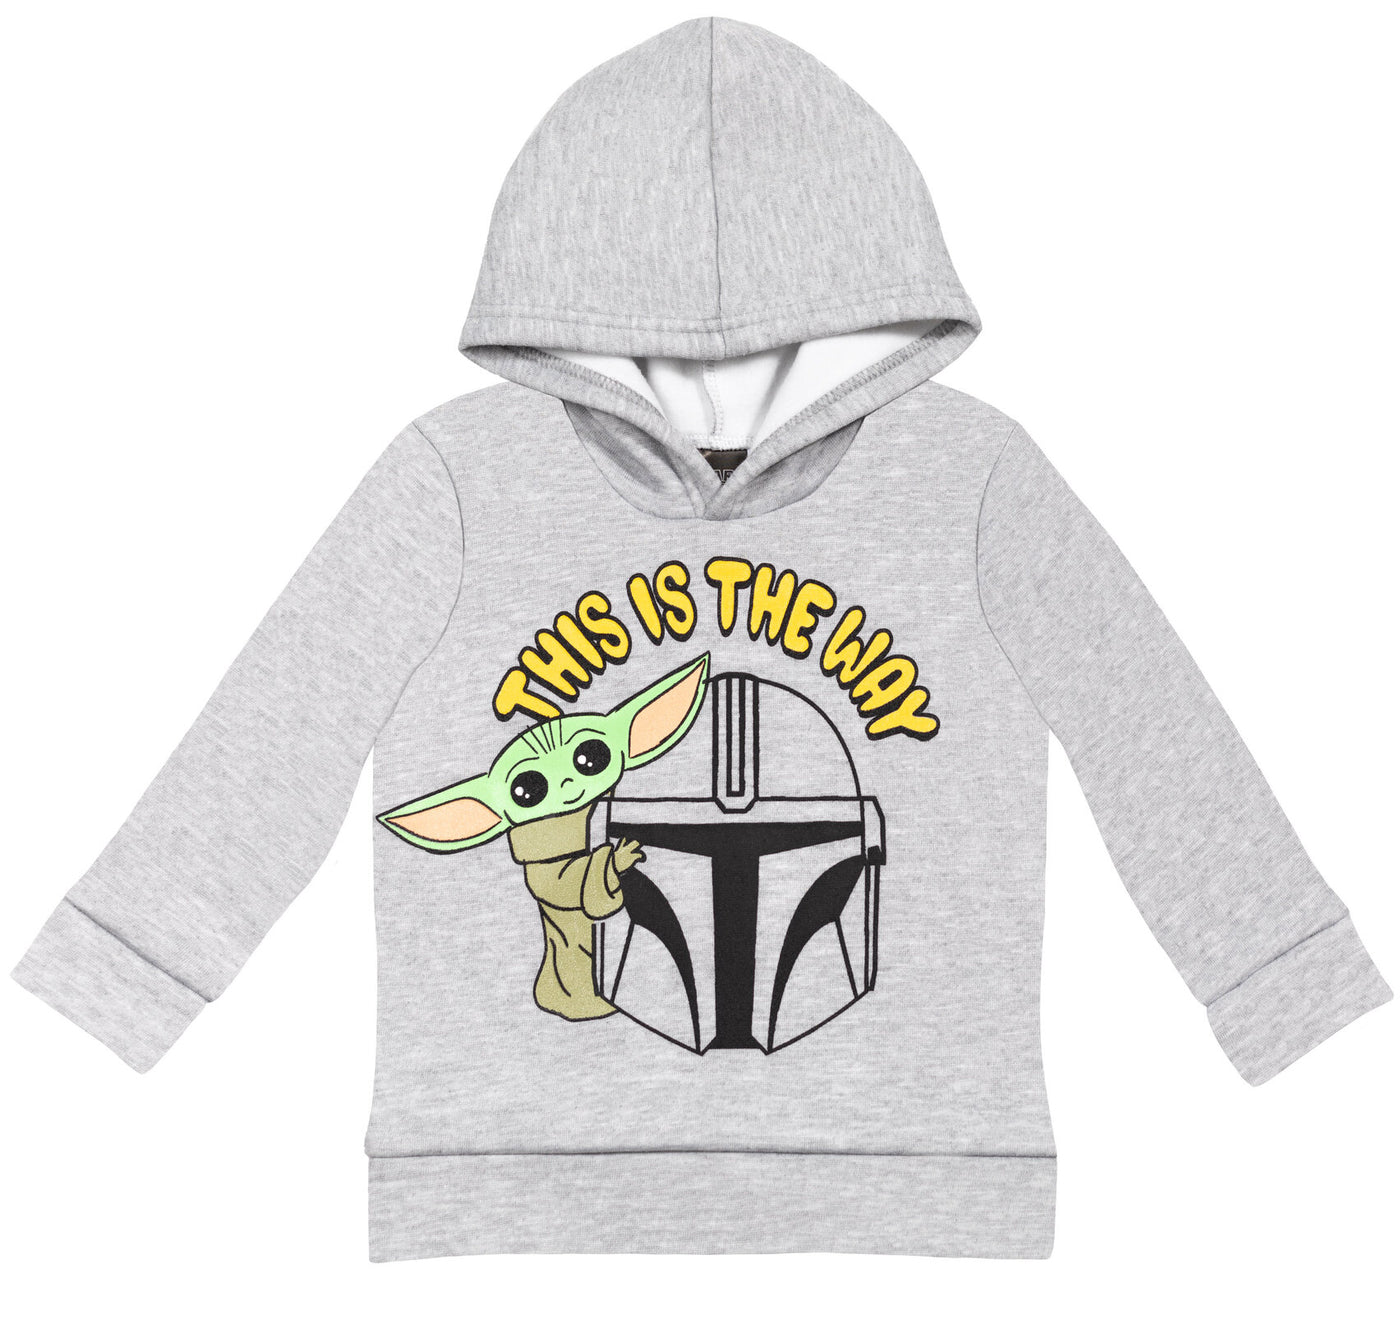 Star Wars The Mandalorian Baby Yoda Fleece Pullover Hoodie and Jogger Pants Outfit Set